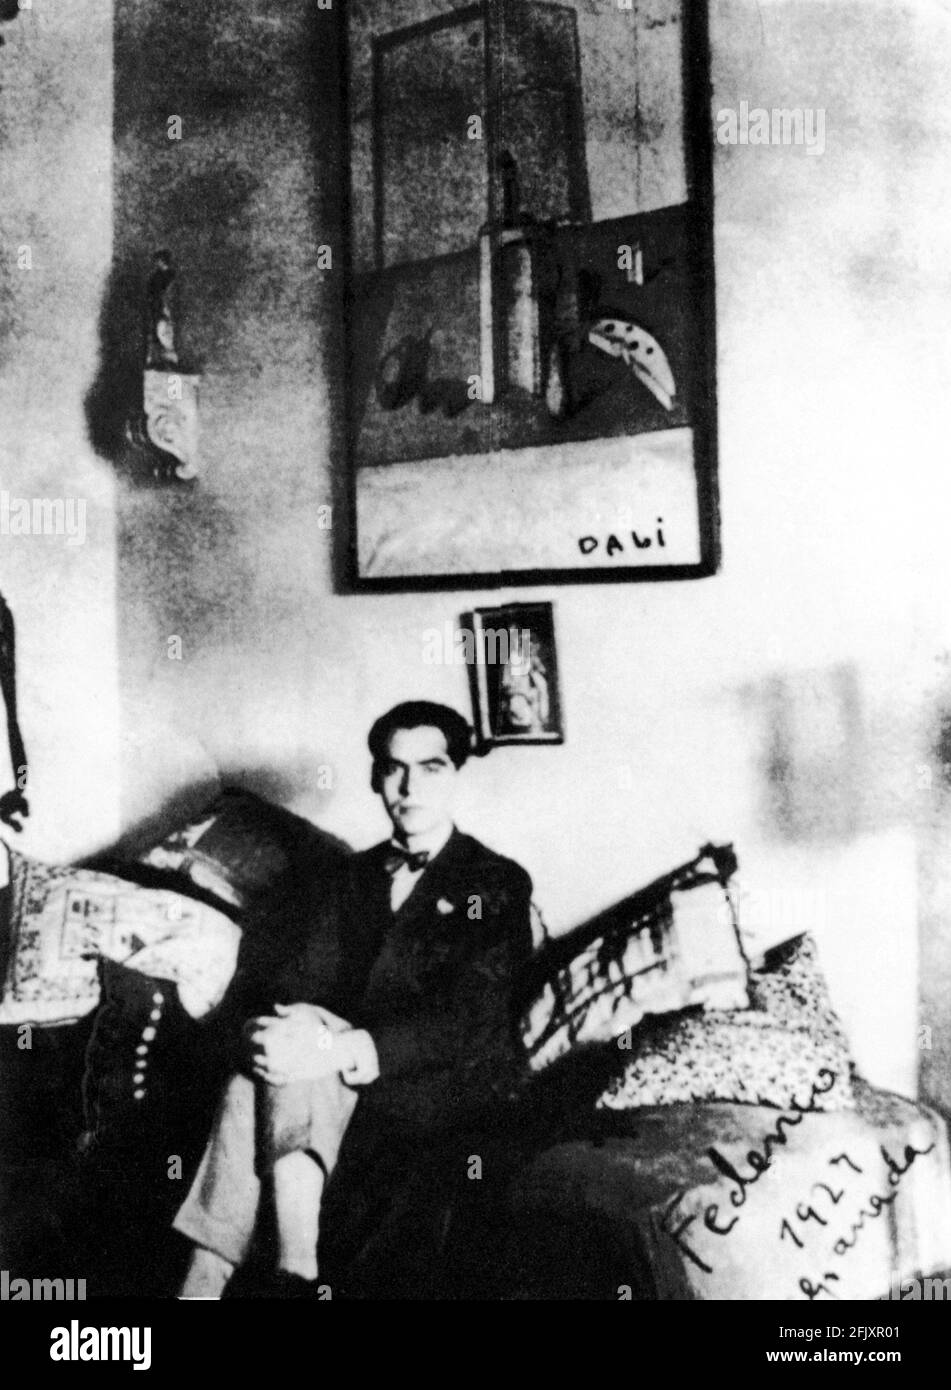 1927 , Madrid , Spain  : The spanish poet FEDERICO GARCIA LORCA ( 1898 - 1936 ) with a Salvador Dalì painting  - TEATRO - THEATER -  POETA - POESIA - POETRY - SCRITTORE - DRAMMATURGO  - GAY -  LGBT - omosessuale - omosexuality - omosessualità - homosexual - tie - cravatta - papillon  ----  Archivio GBB Stock Photo